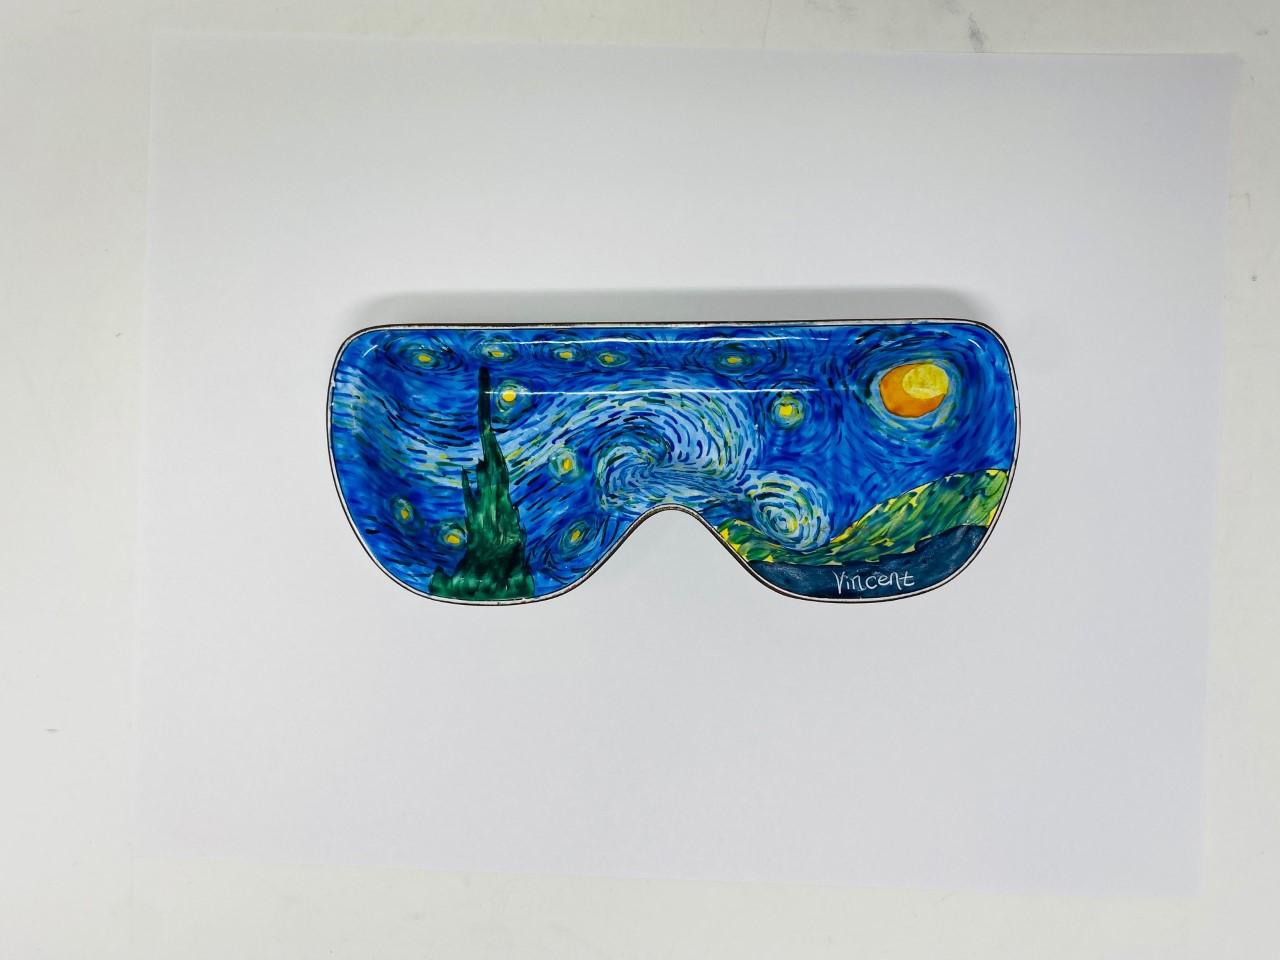 Beautiful trinket dish or eyeglass or sunglasses tray. This piece by Kelvin Chen goes hand in hand with his whimsical designs that juxtapose iconic art legacies in beautiful utilitarian and unique ways. This piece is cool and effortless.